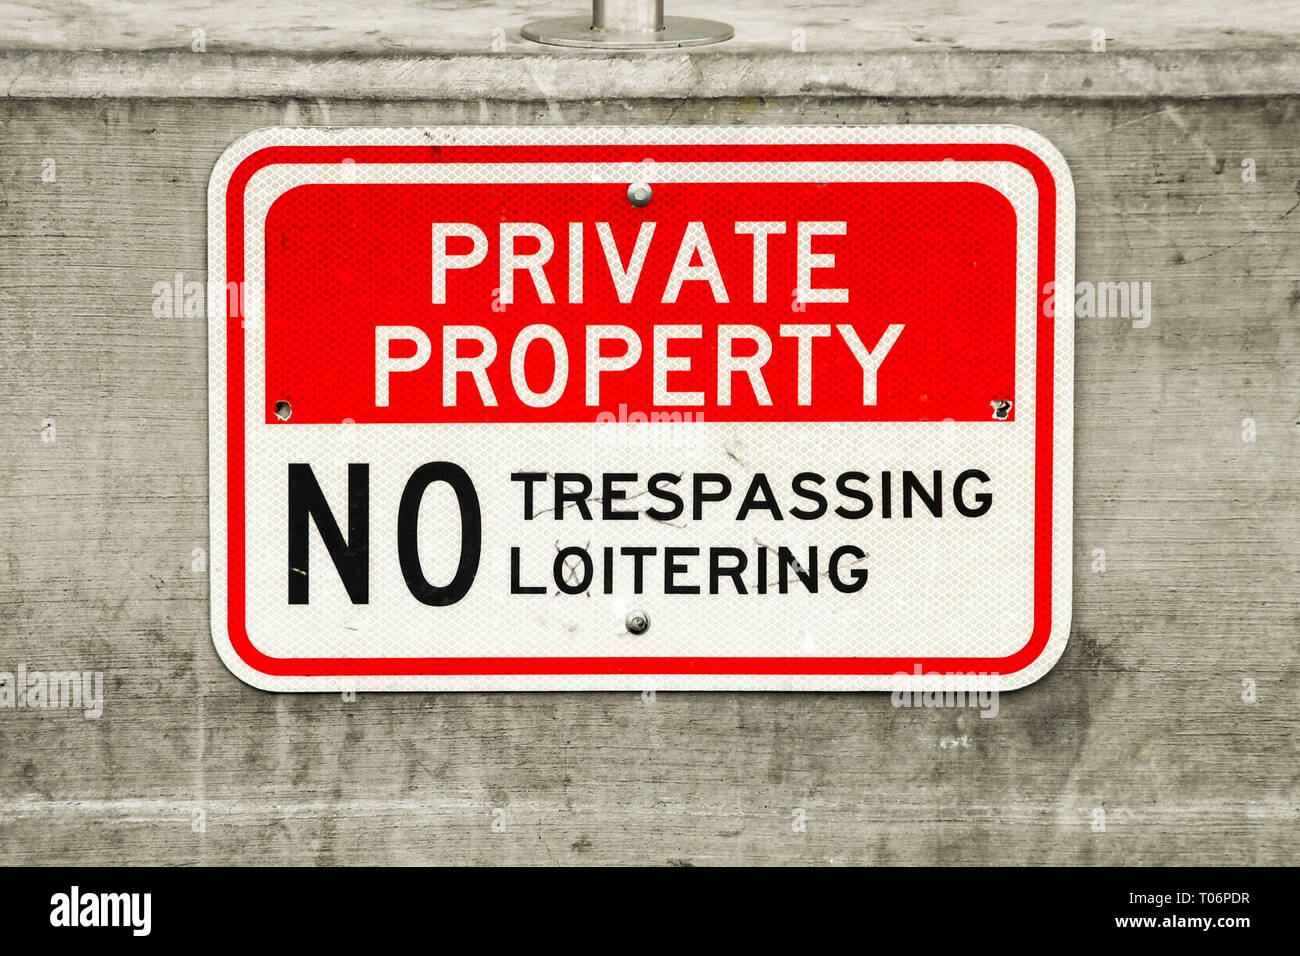 LAS VEGAS, NV, USA - FEBRUARY 2019: Close up view of a 'Private property - No Trespassing or Loitering' sign on a sidewalk on the Las Vegas Strip. Stock Photo